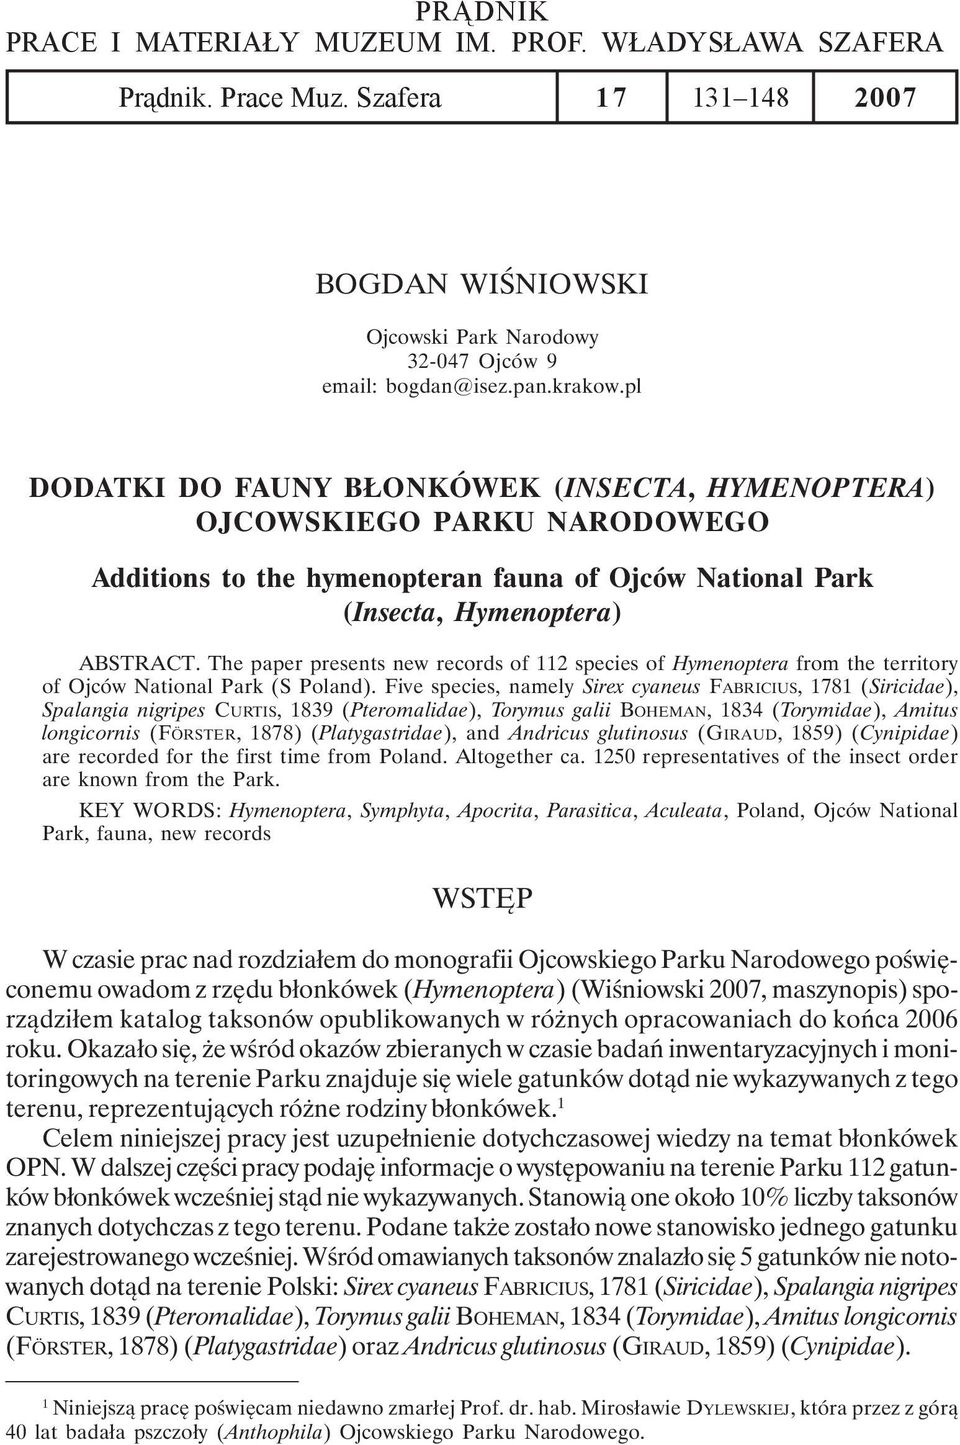 The paper presents new records of 112 species of Hymenoptera from the territory of Ojców National Park (S Poland).